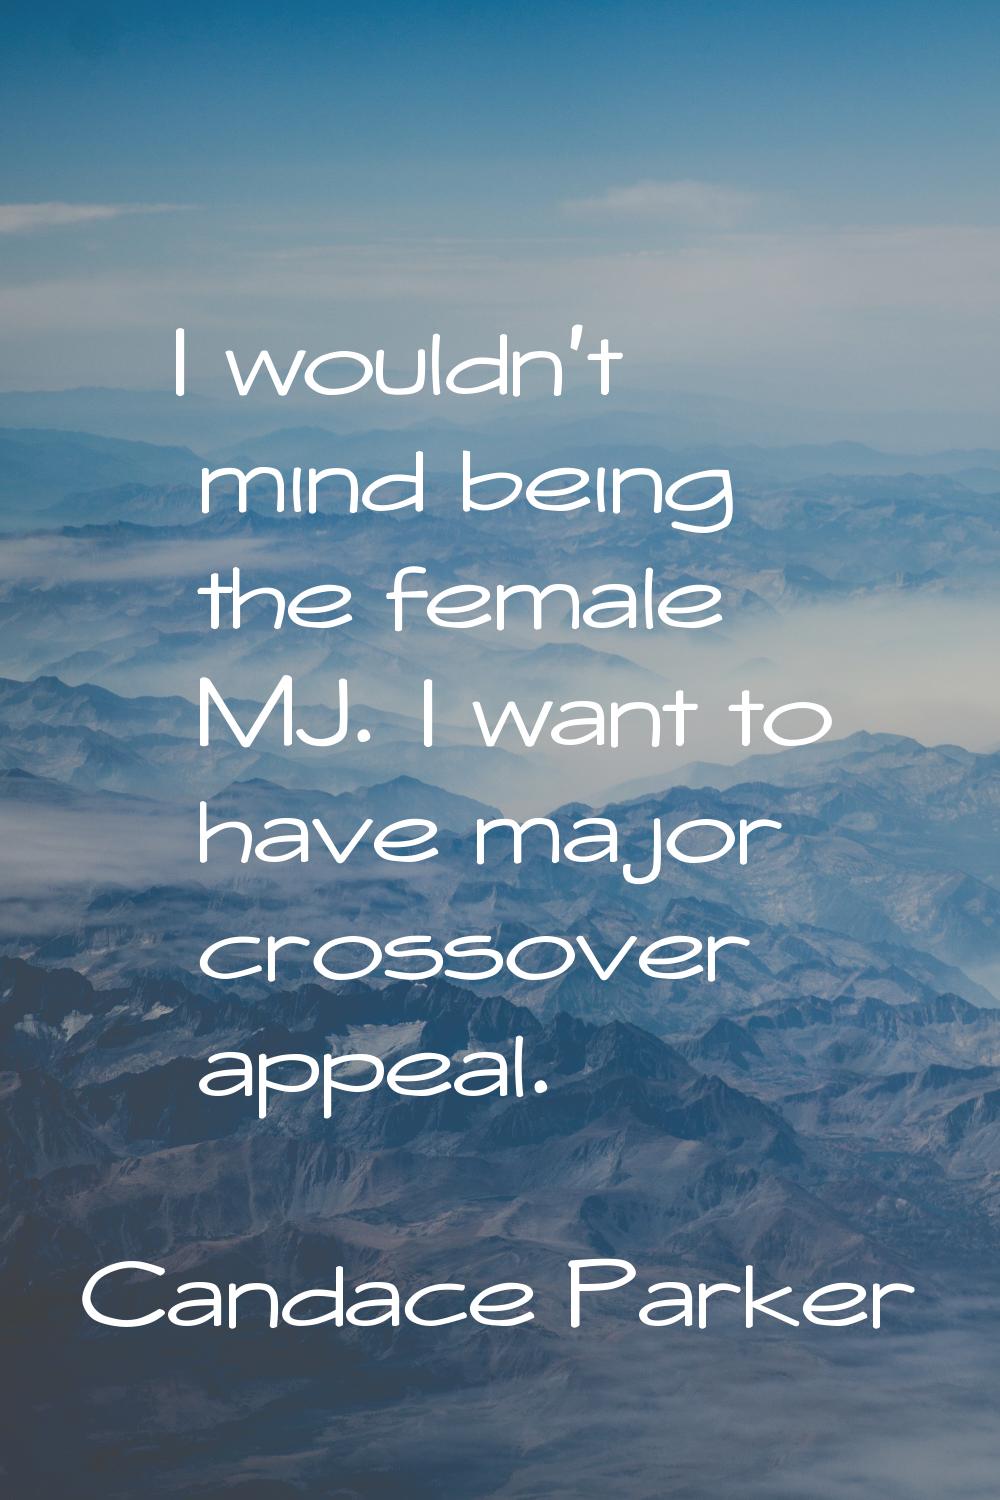 I wouldn't mind being the female MJ. I want to have major crossover appeal.